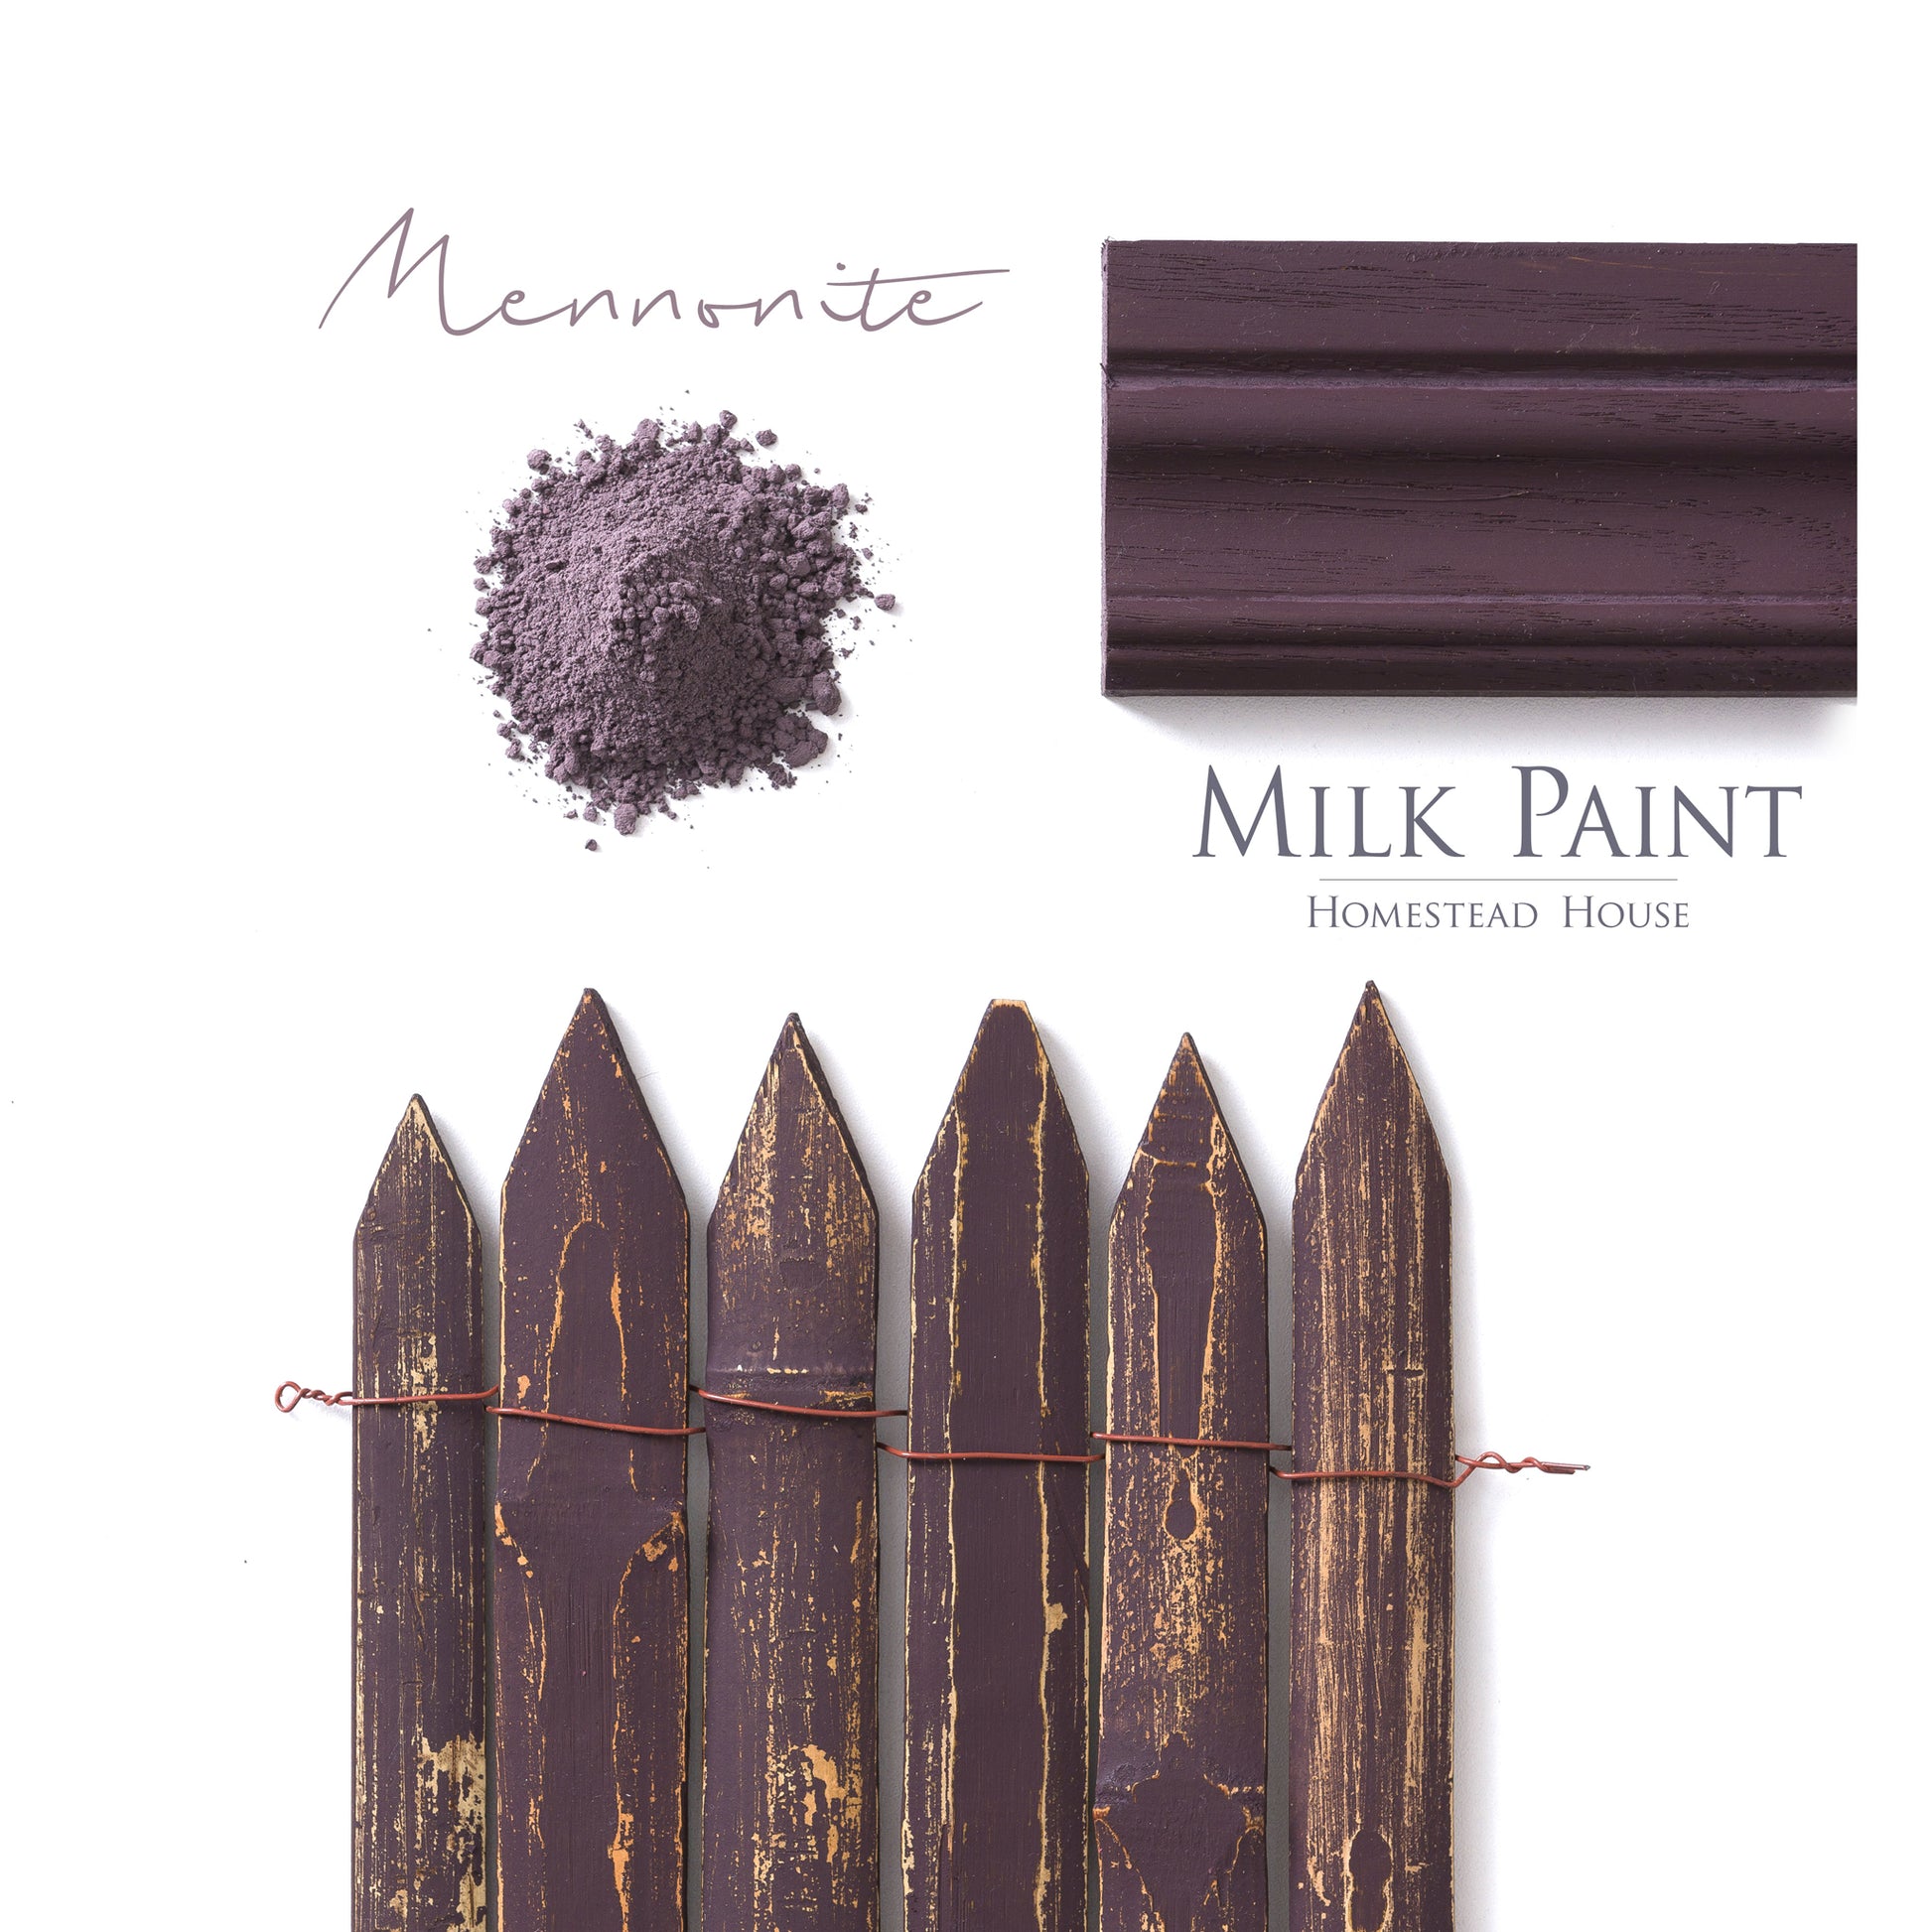 Milk Paint from Homestead House in Mennonite, a dark purple with a blackish red undertone.  |  homesteadhouse.ca